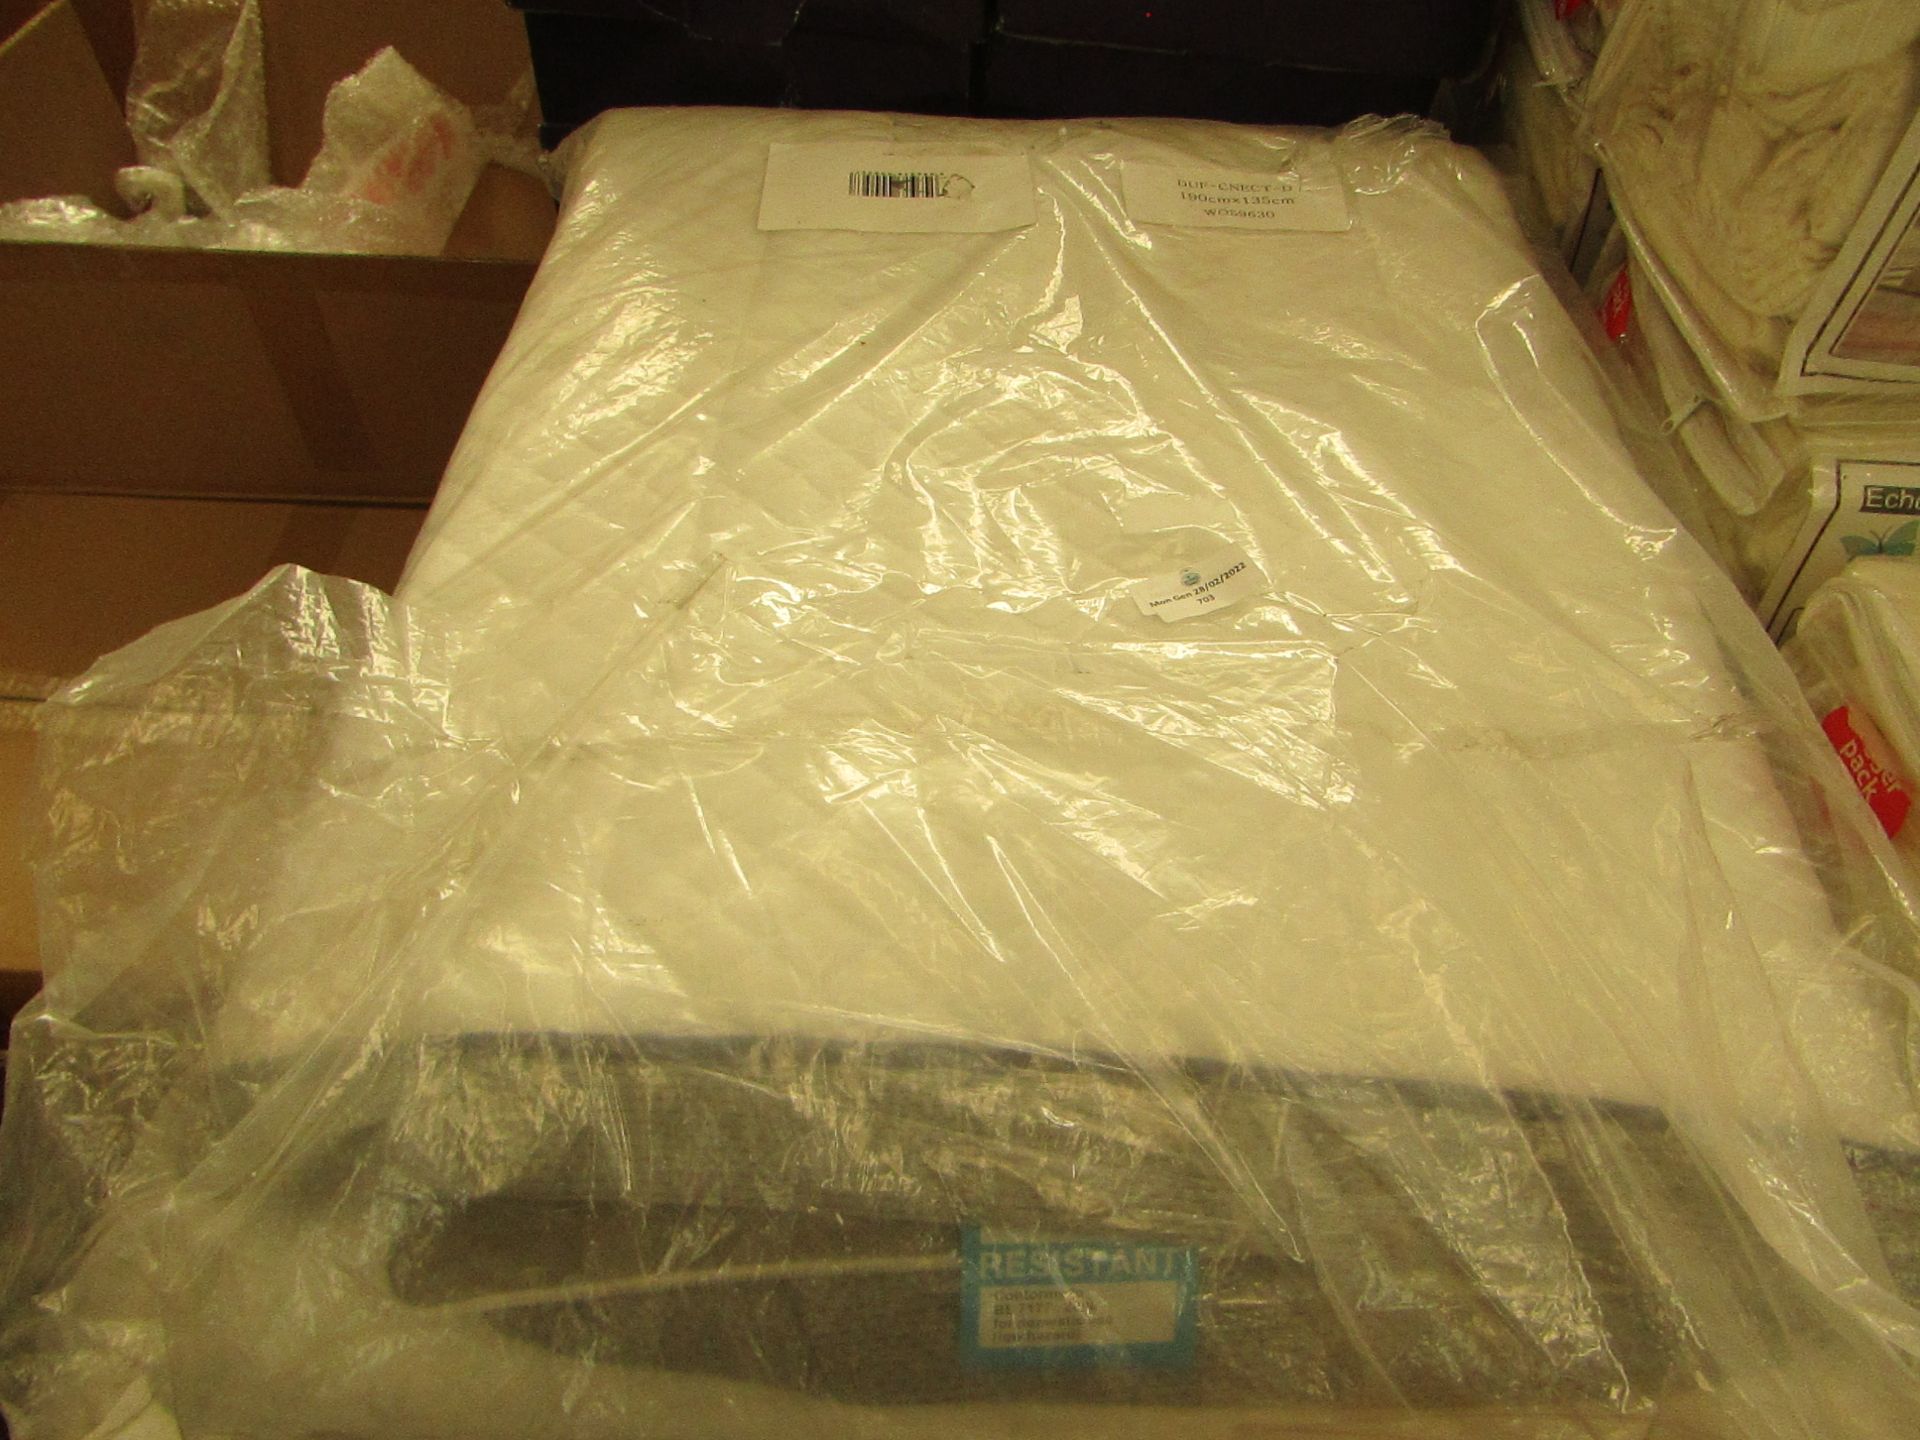 Nectar - Mattress Protector ( 190x135cm ) - Used Condition, Non Original Packaging.